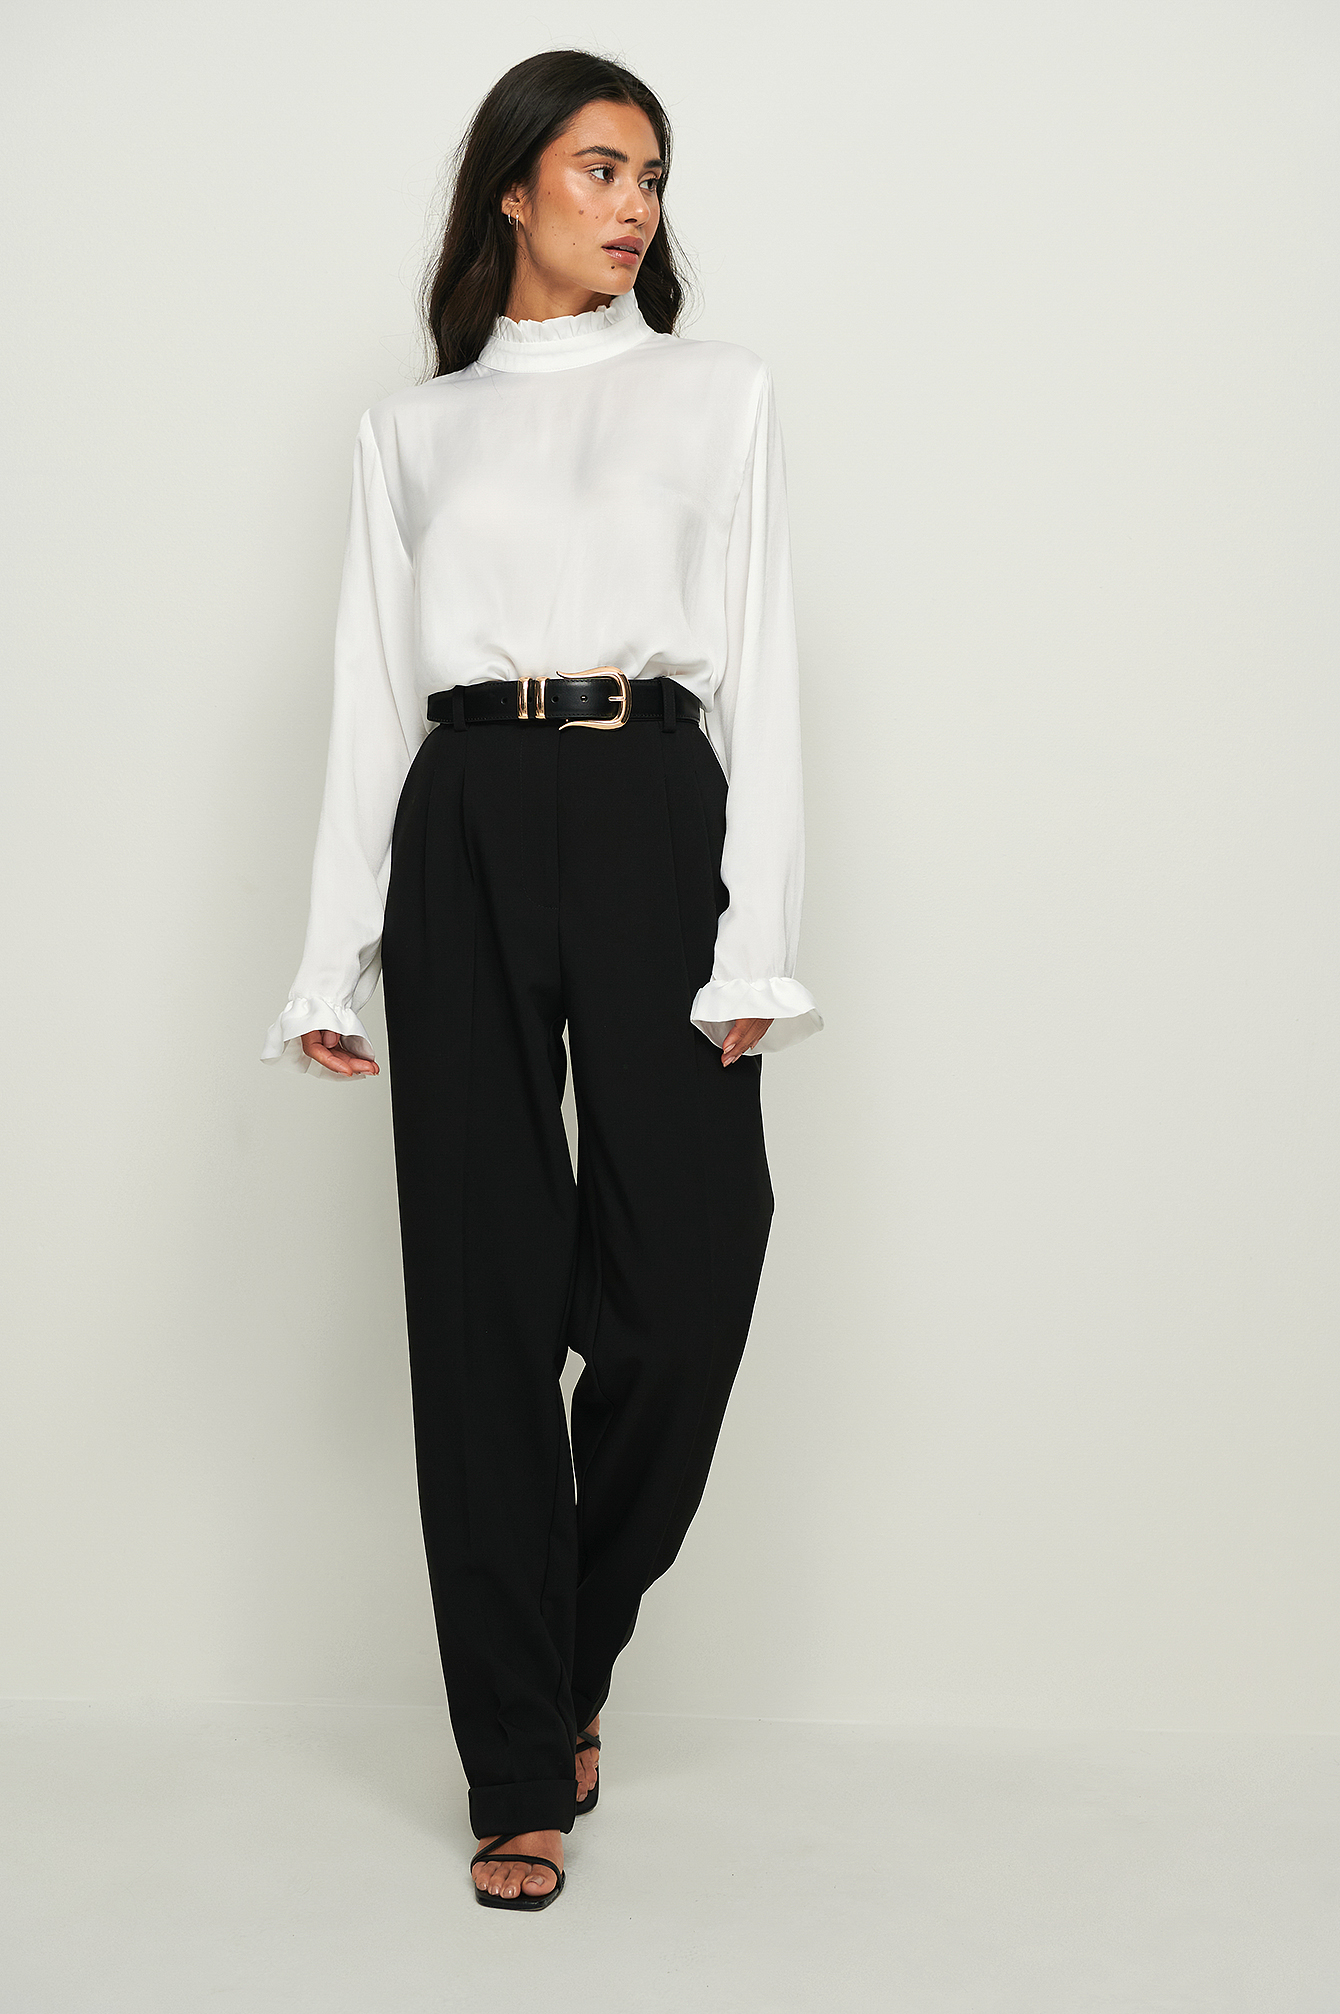 Frill Sleeve Elastic Collar Blouse Outfit